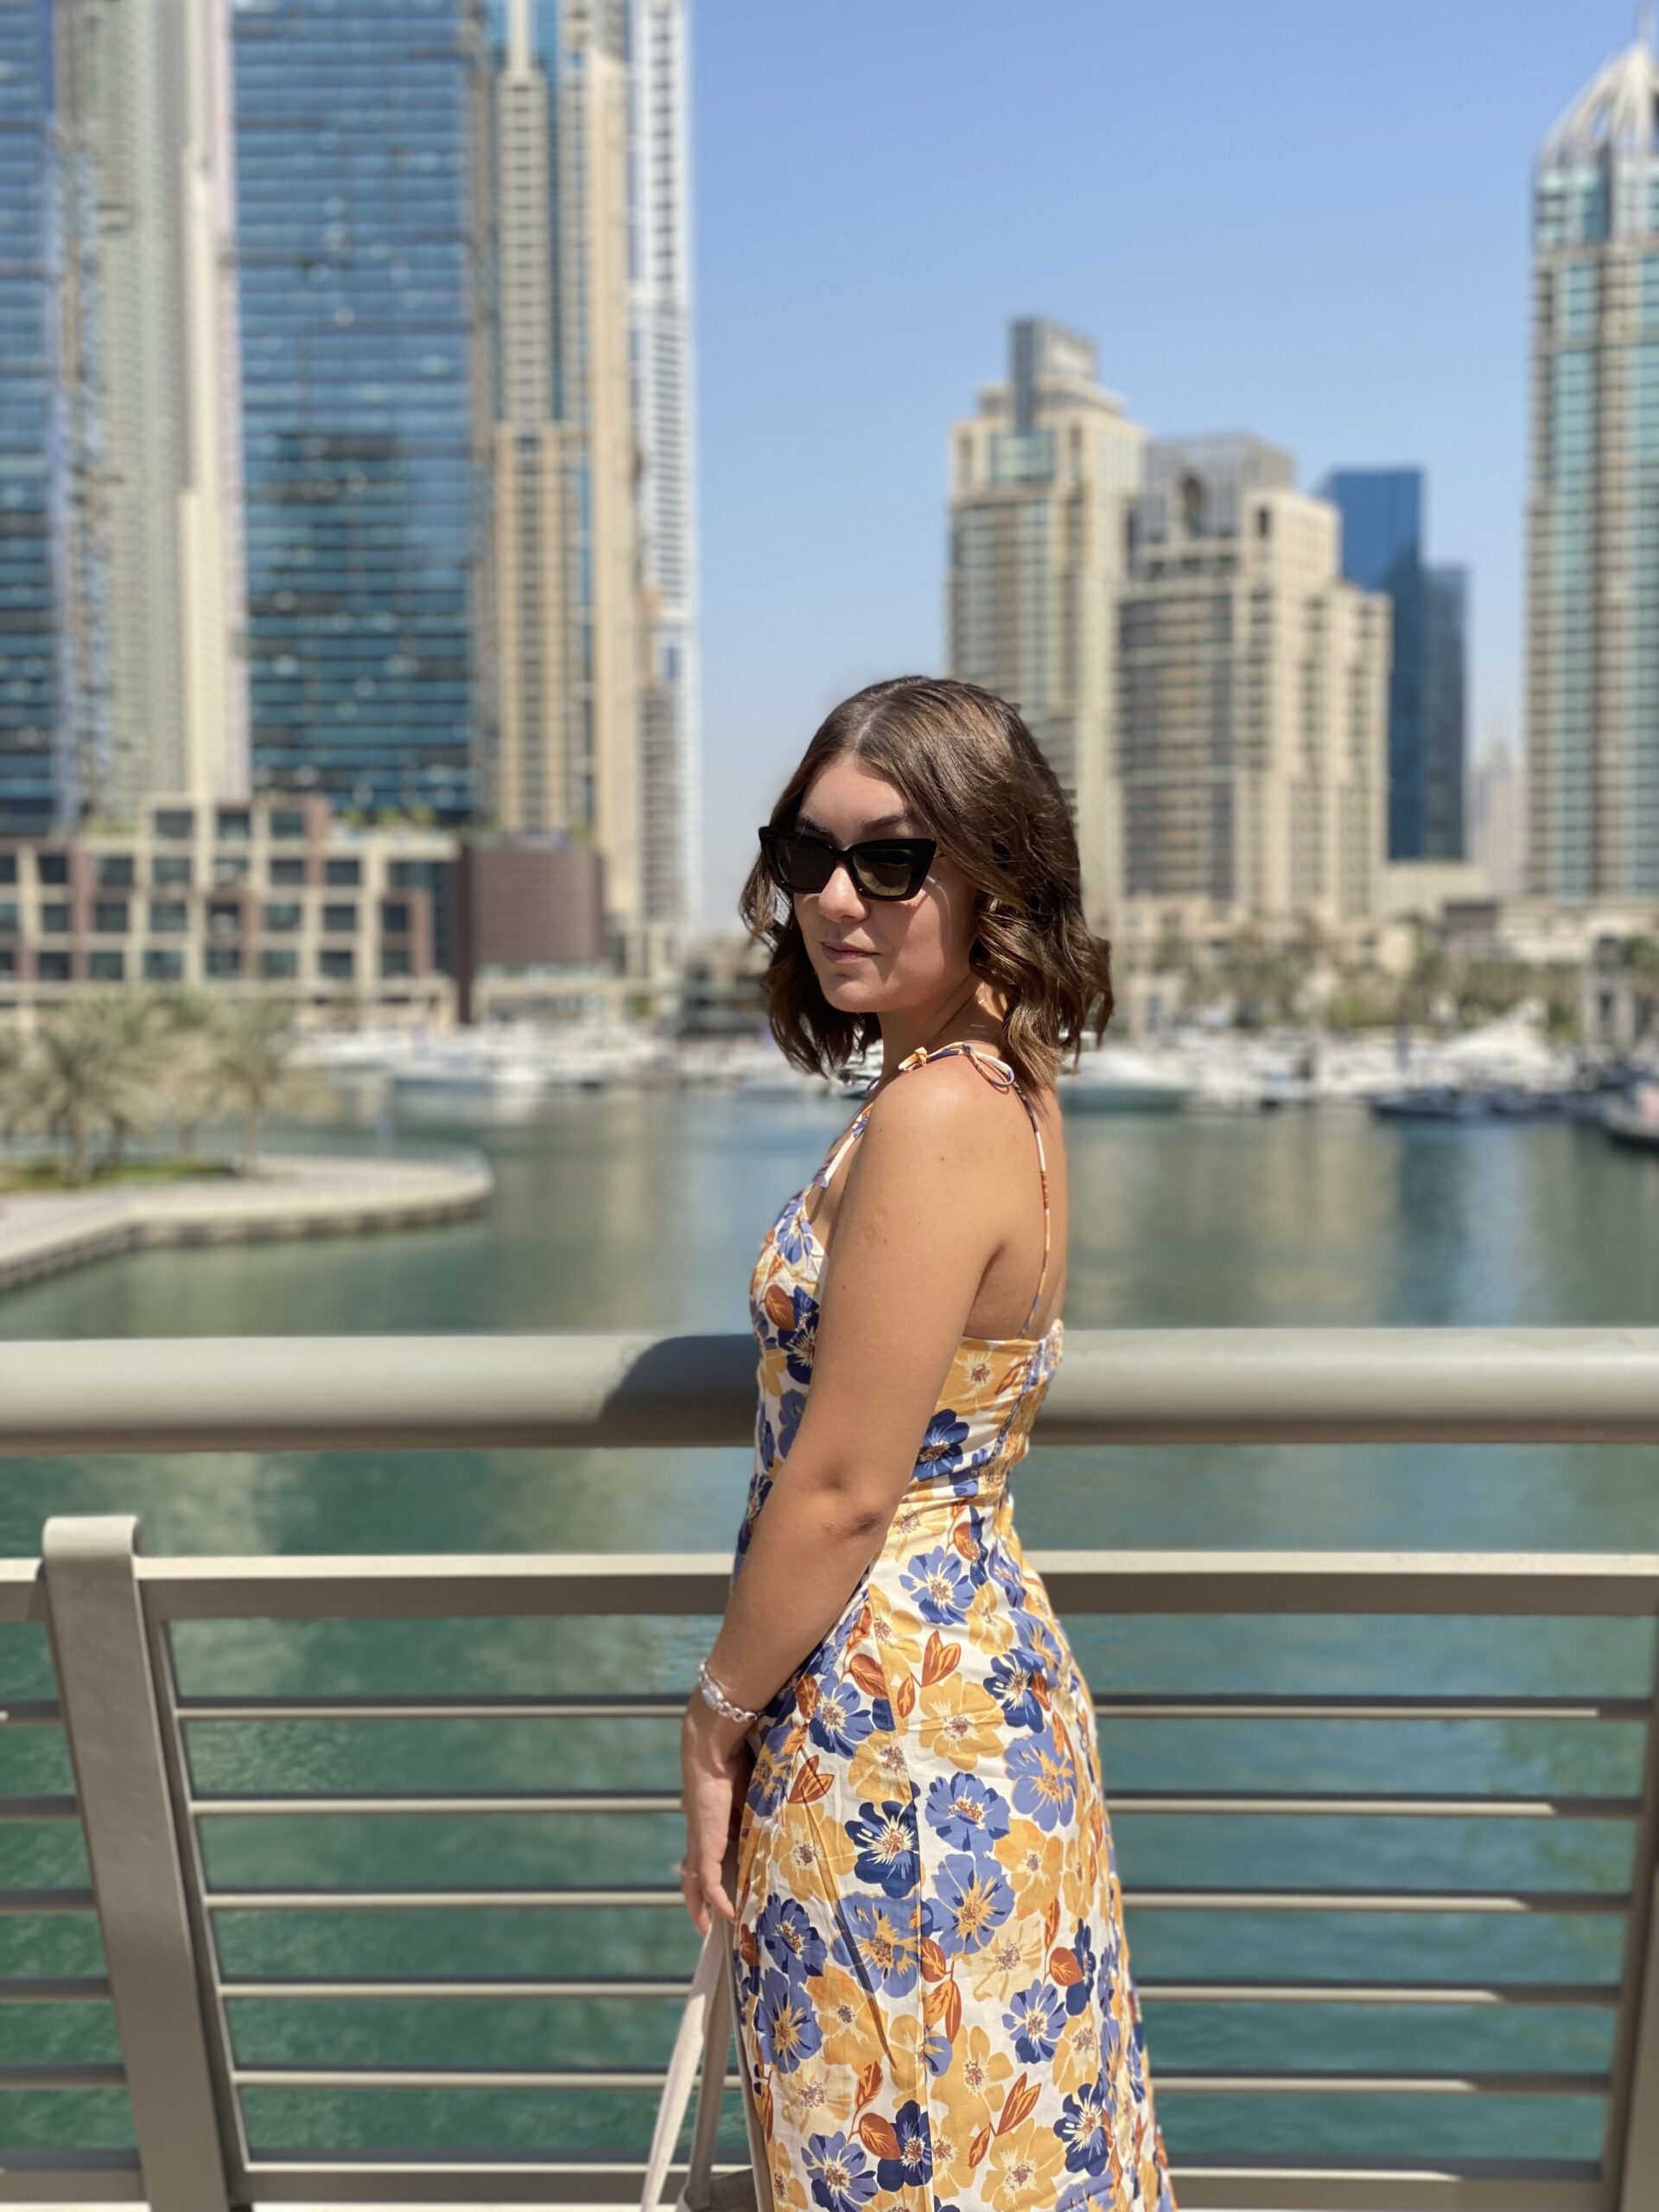 Amina poses in a dress in front of the Dubai skyline